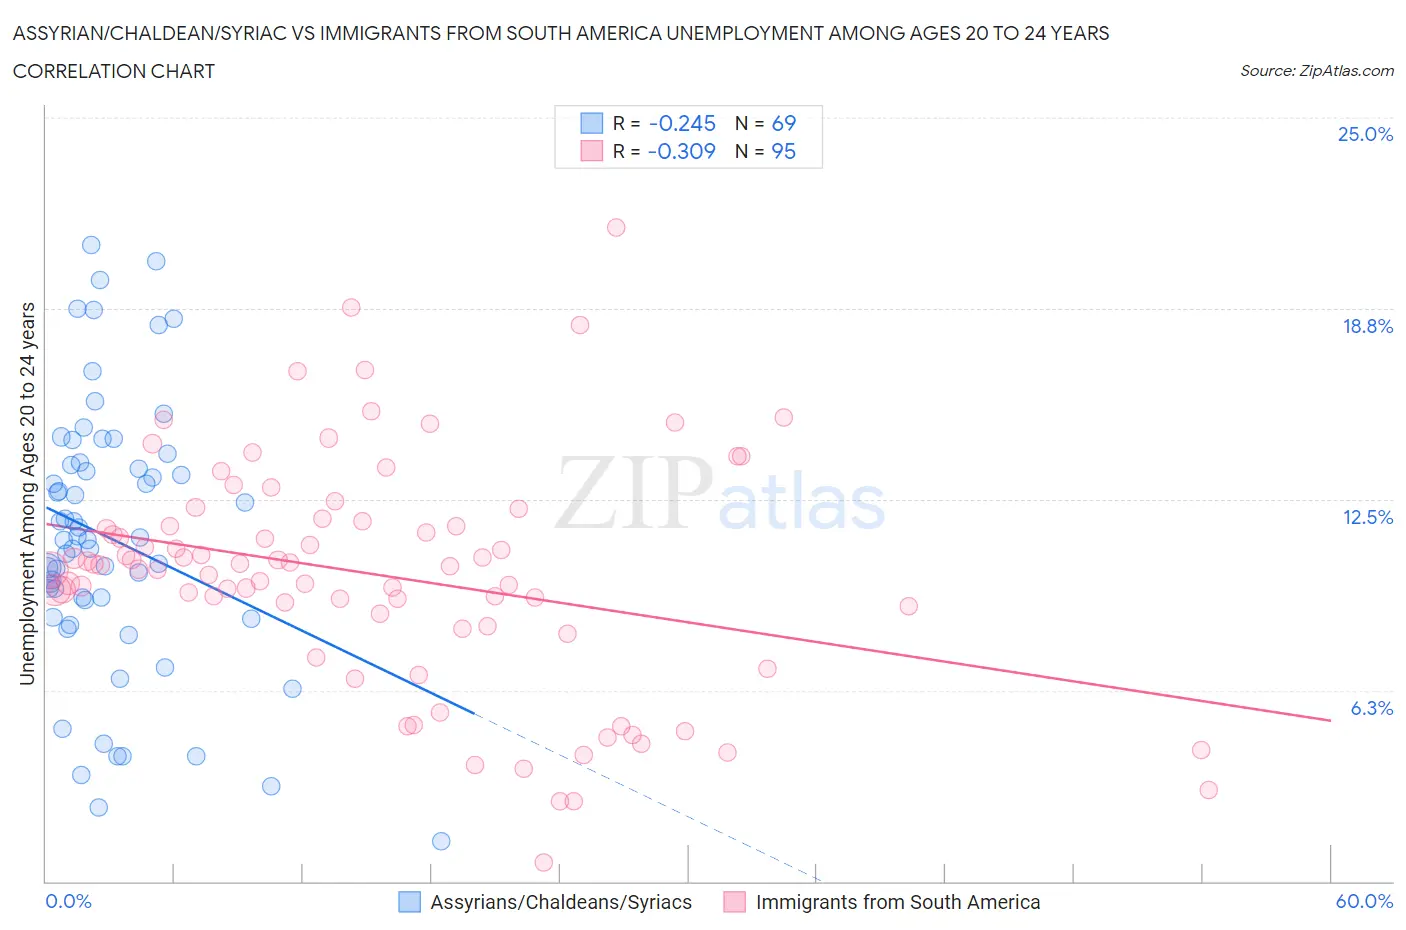 Assyrian/Chaldean/Syriac vs Immigrants from South America Unemployment Among Ages 20 to 24 years